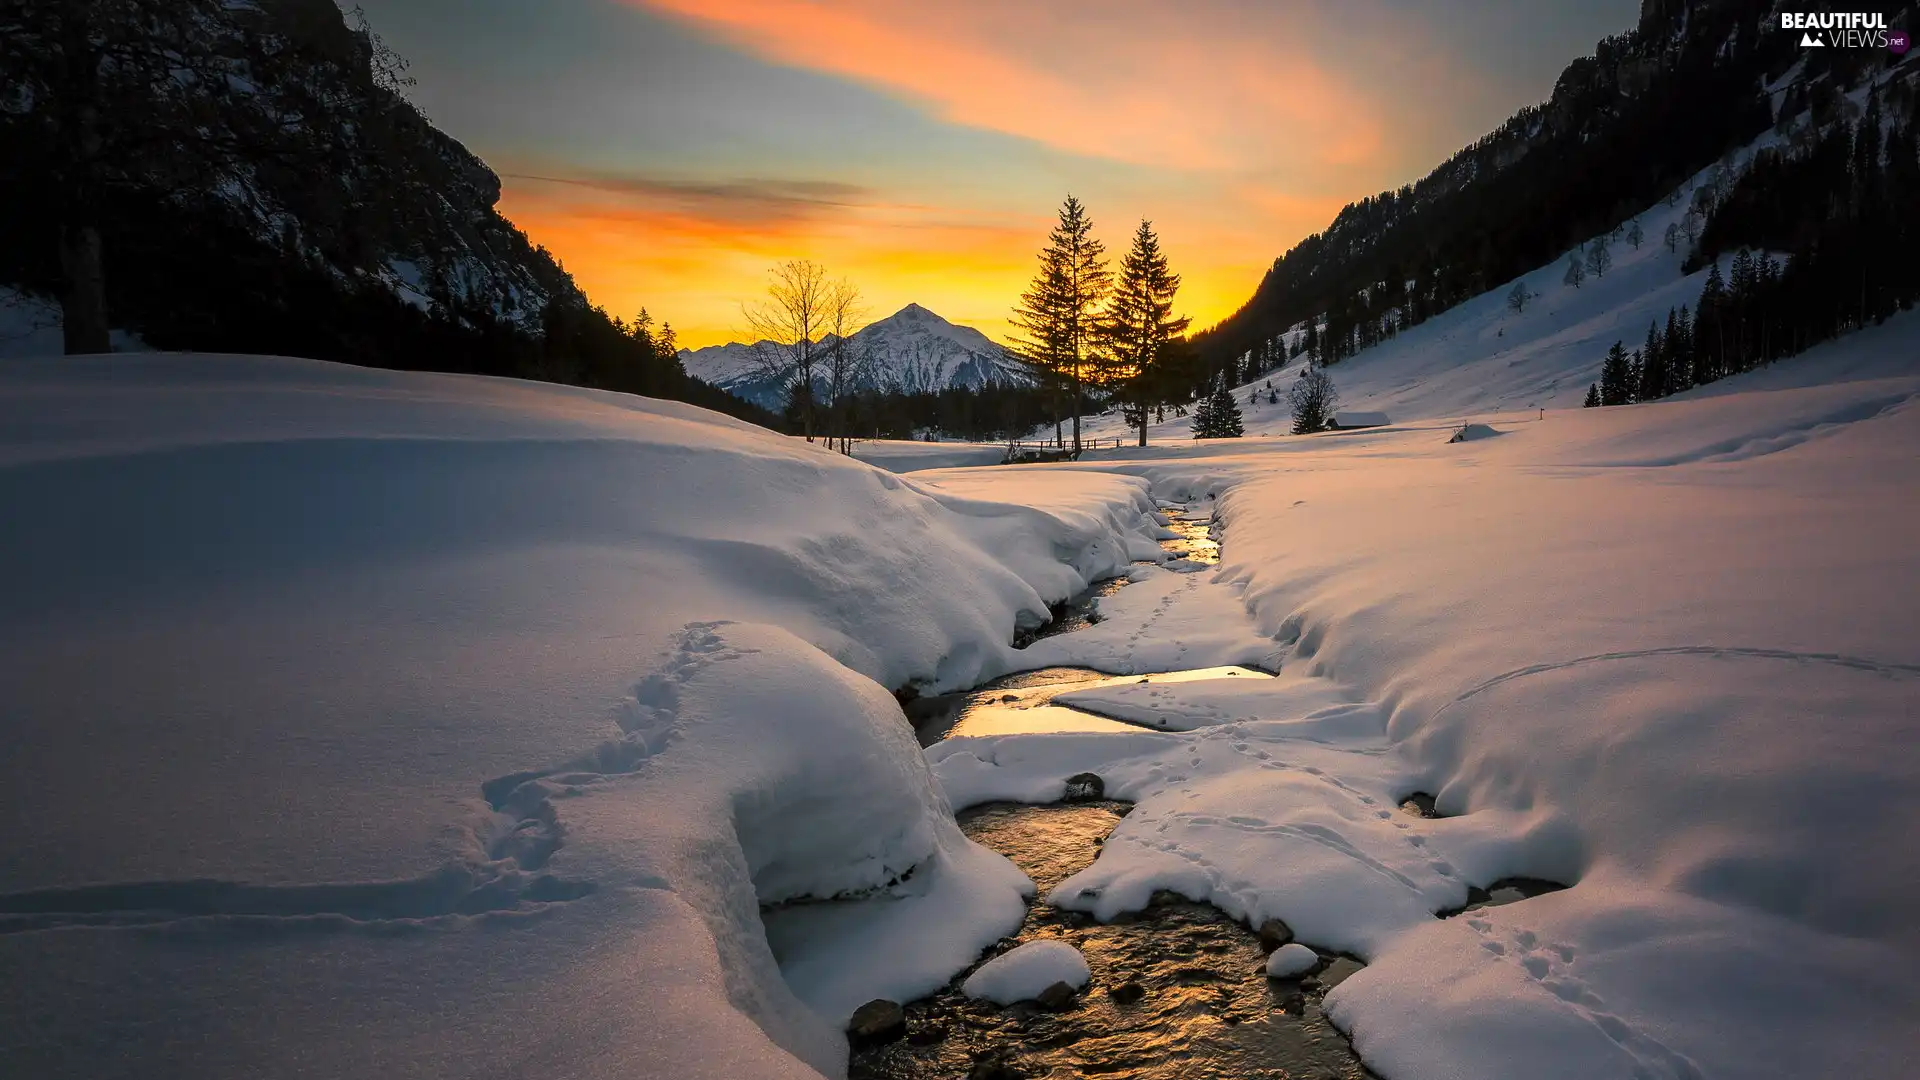 trees, viewes, Great Sunsets, River, traces, Mountains, winter, snow